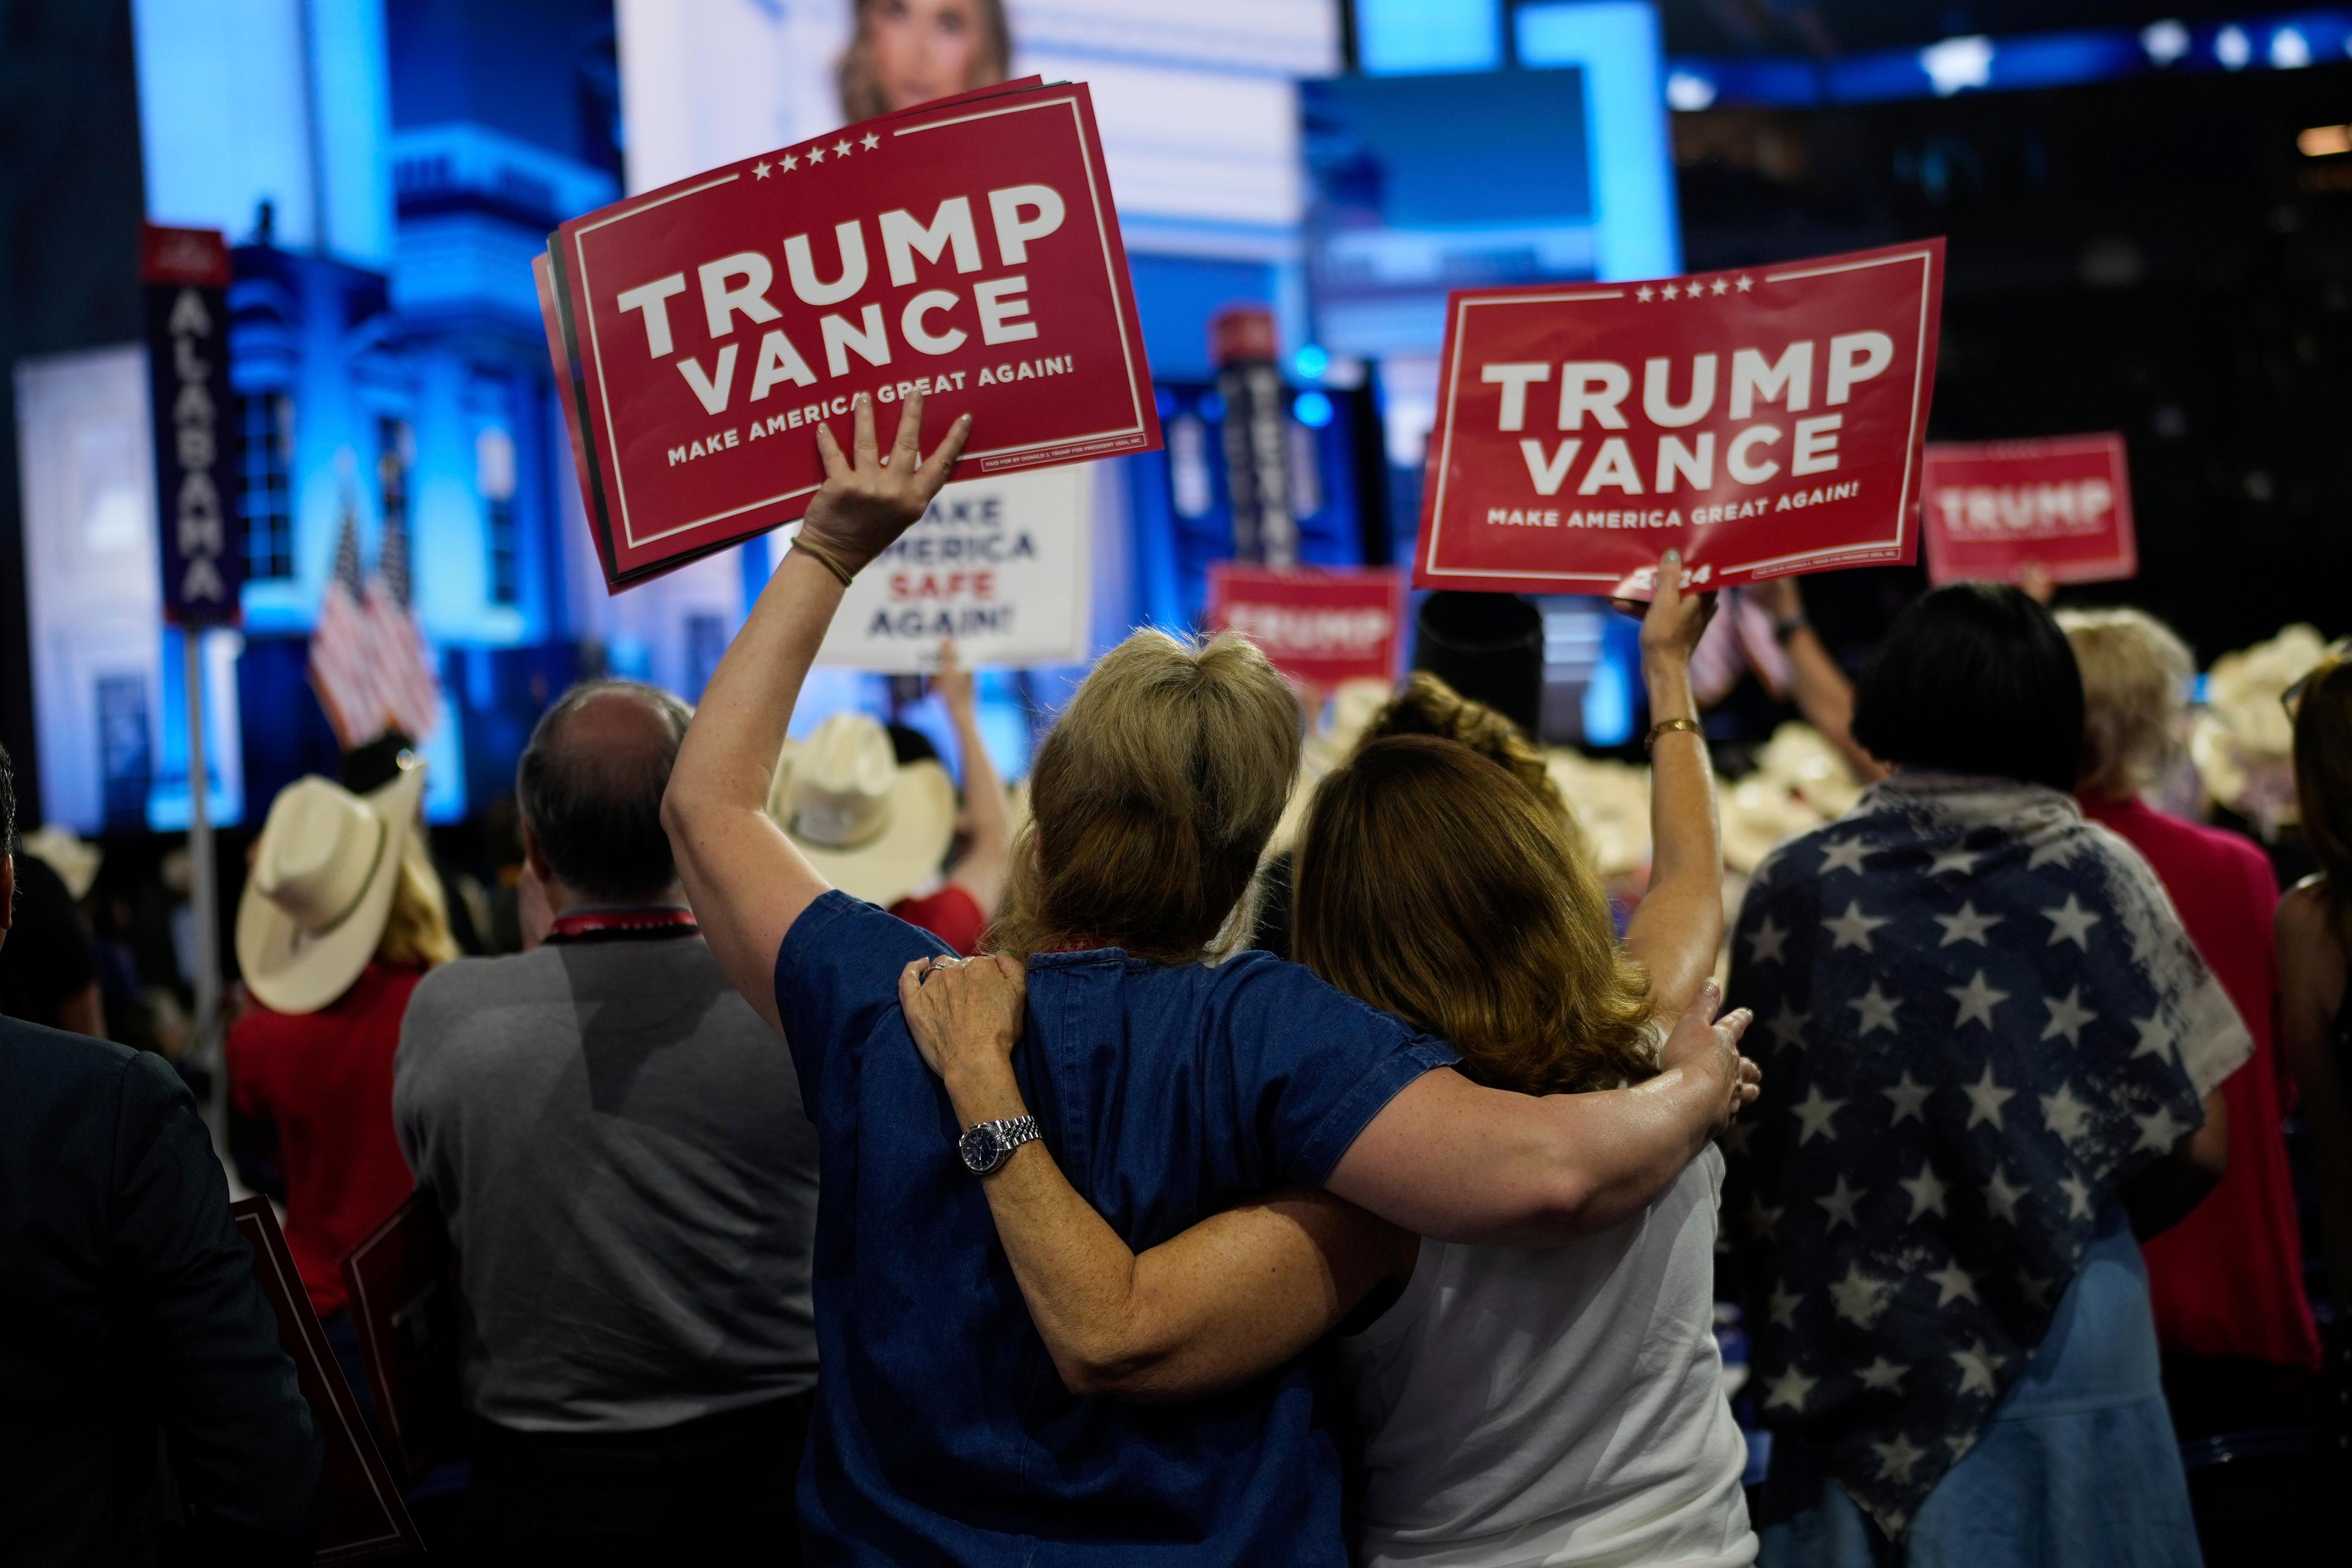 A crowd of people facing away from the camera with a few holding up TRUMP VANCE signs.